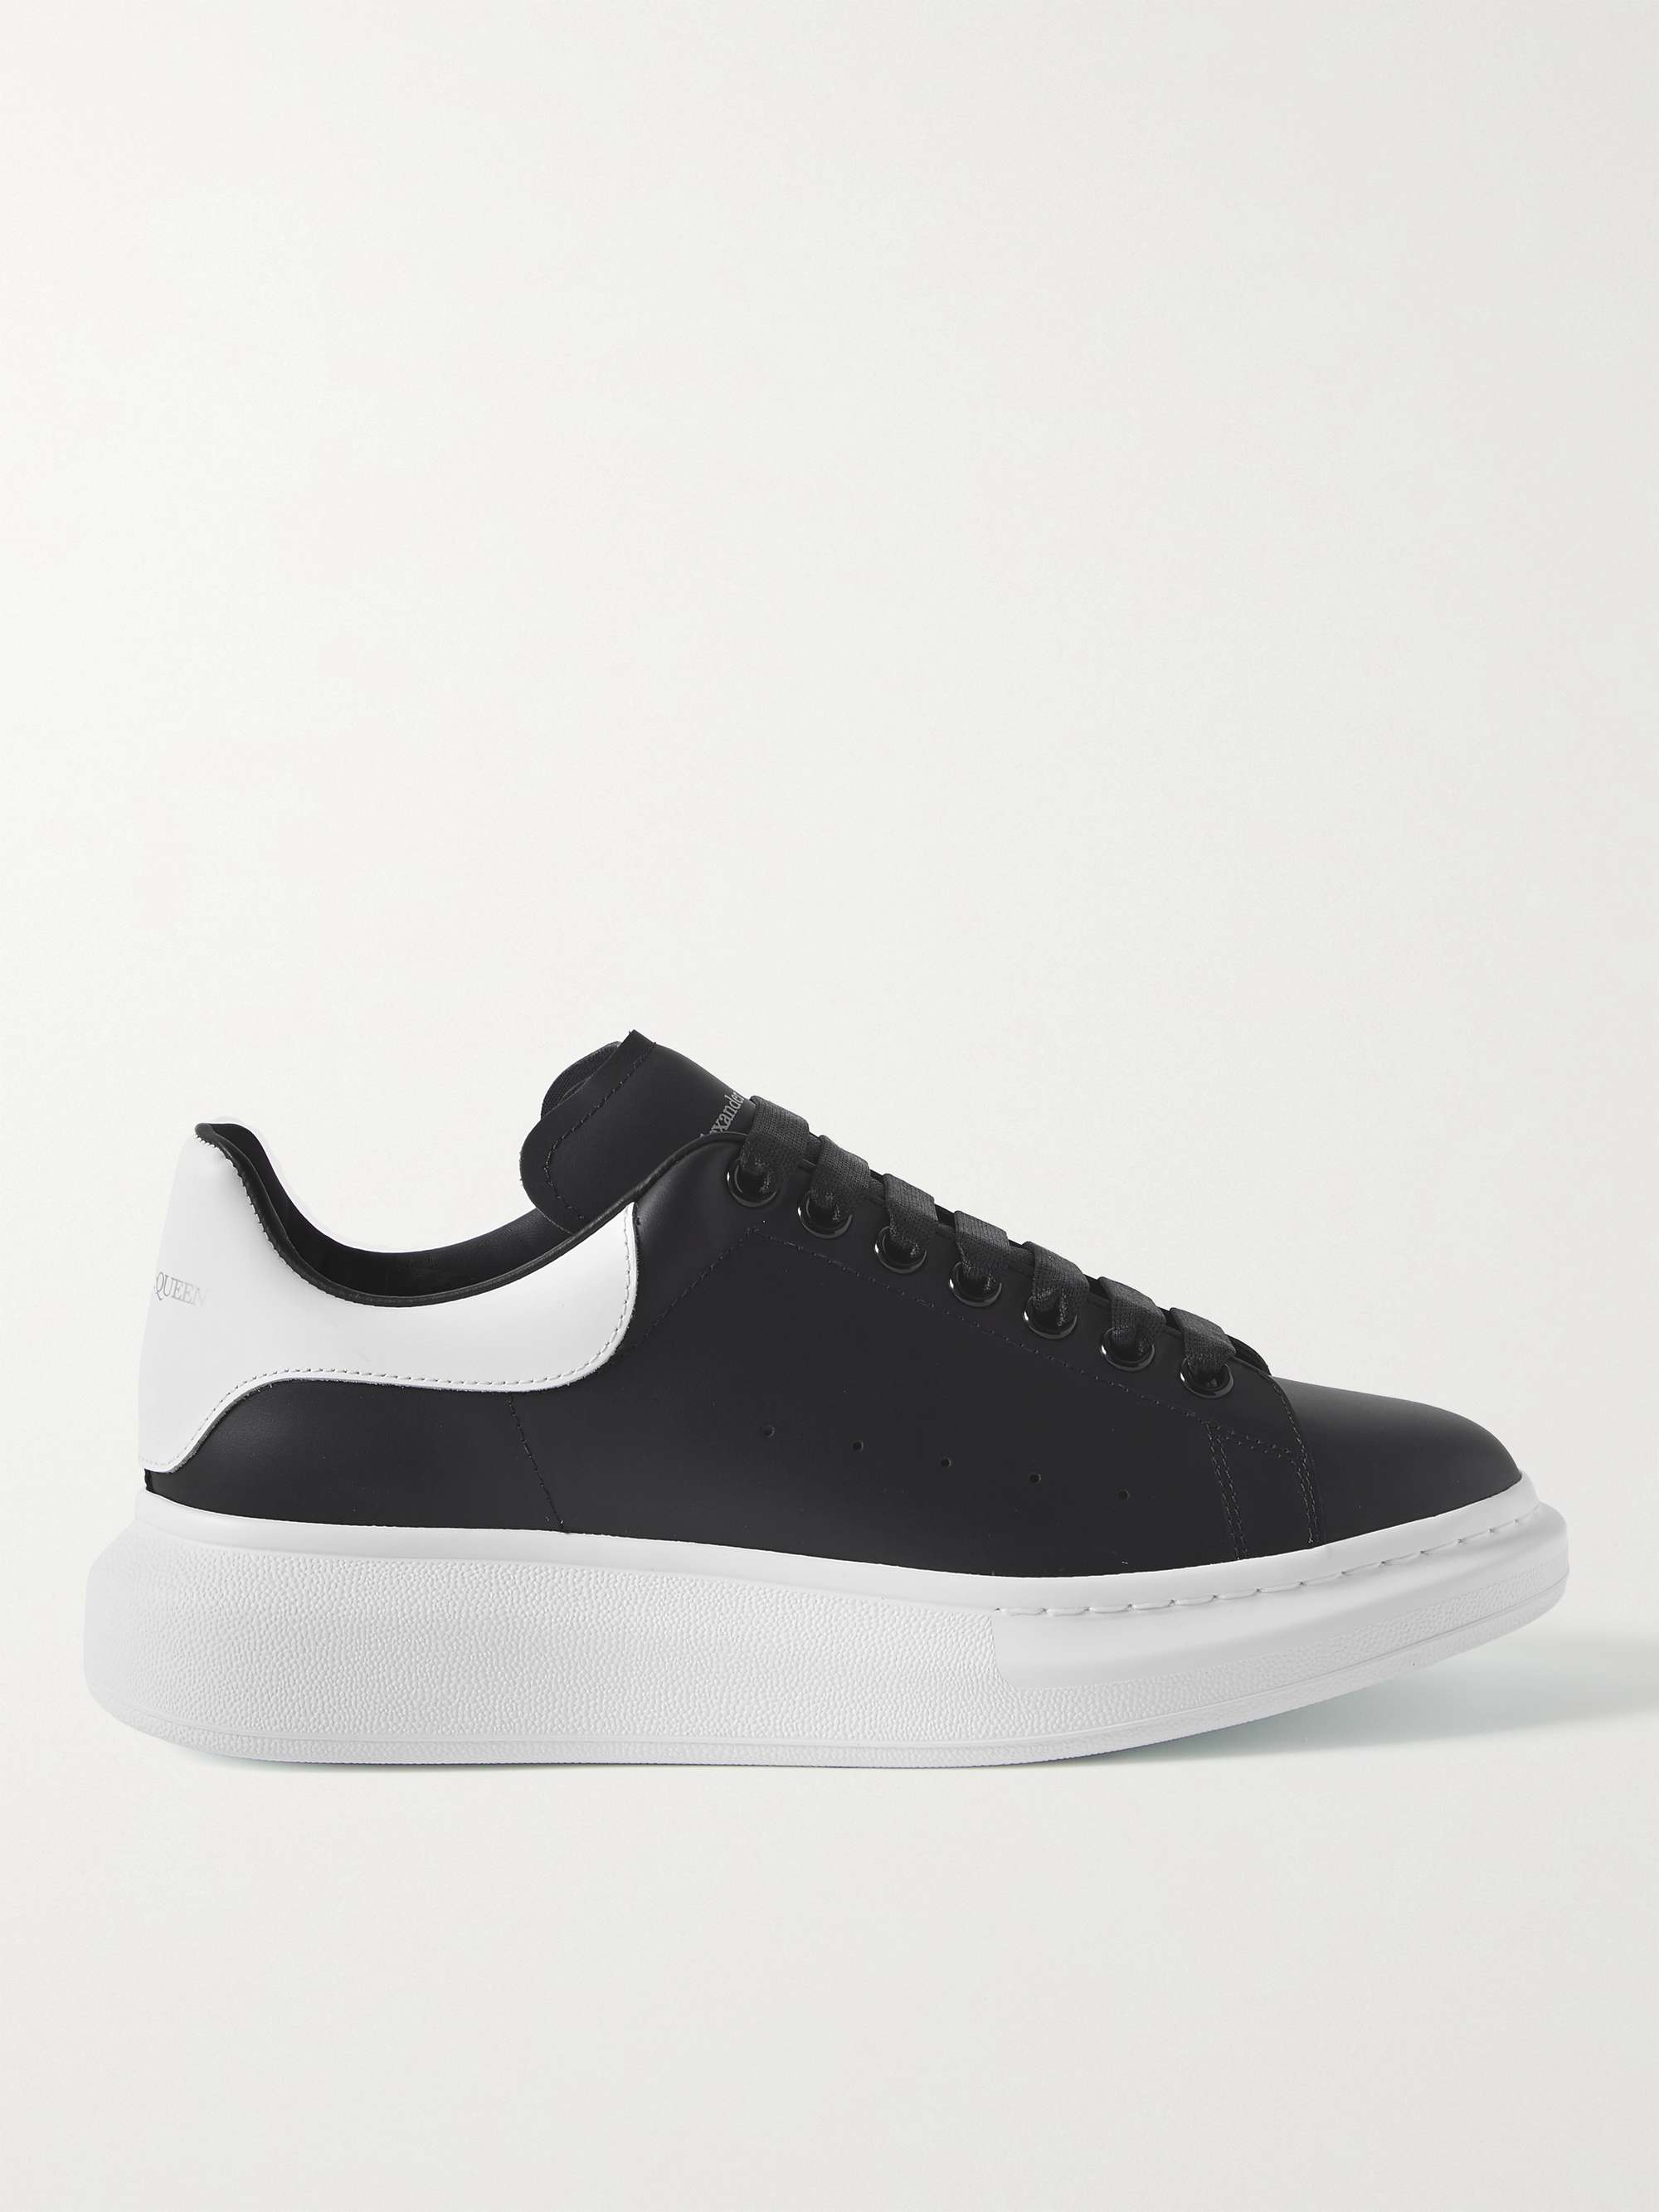 ALEXANDER MCQUEEN Exaggerated-Sole Leather Sneakers | MR PORTER